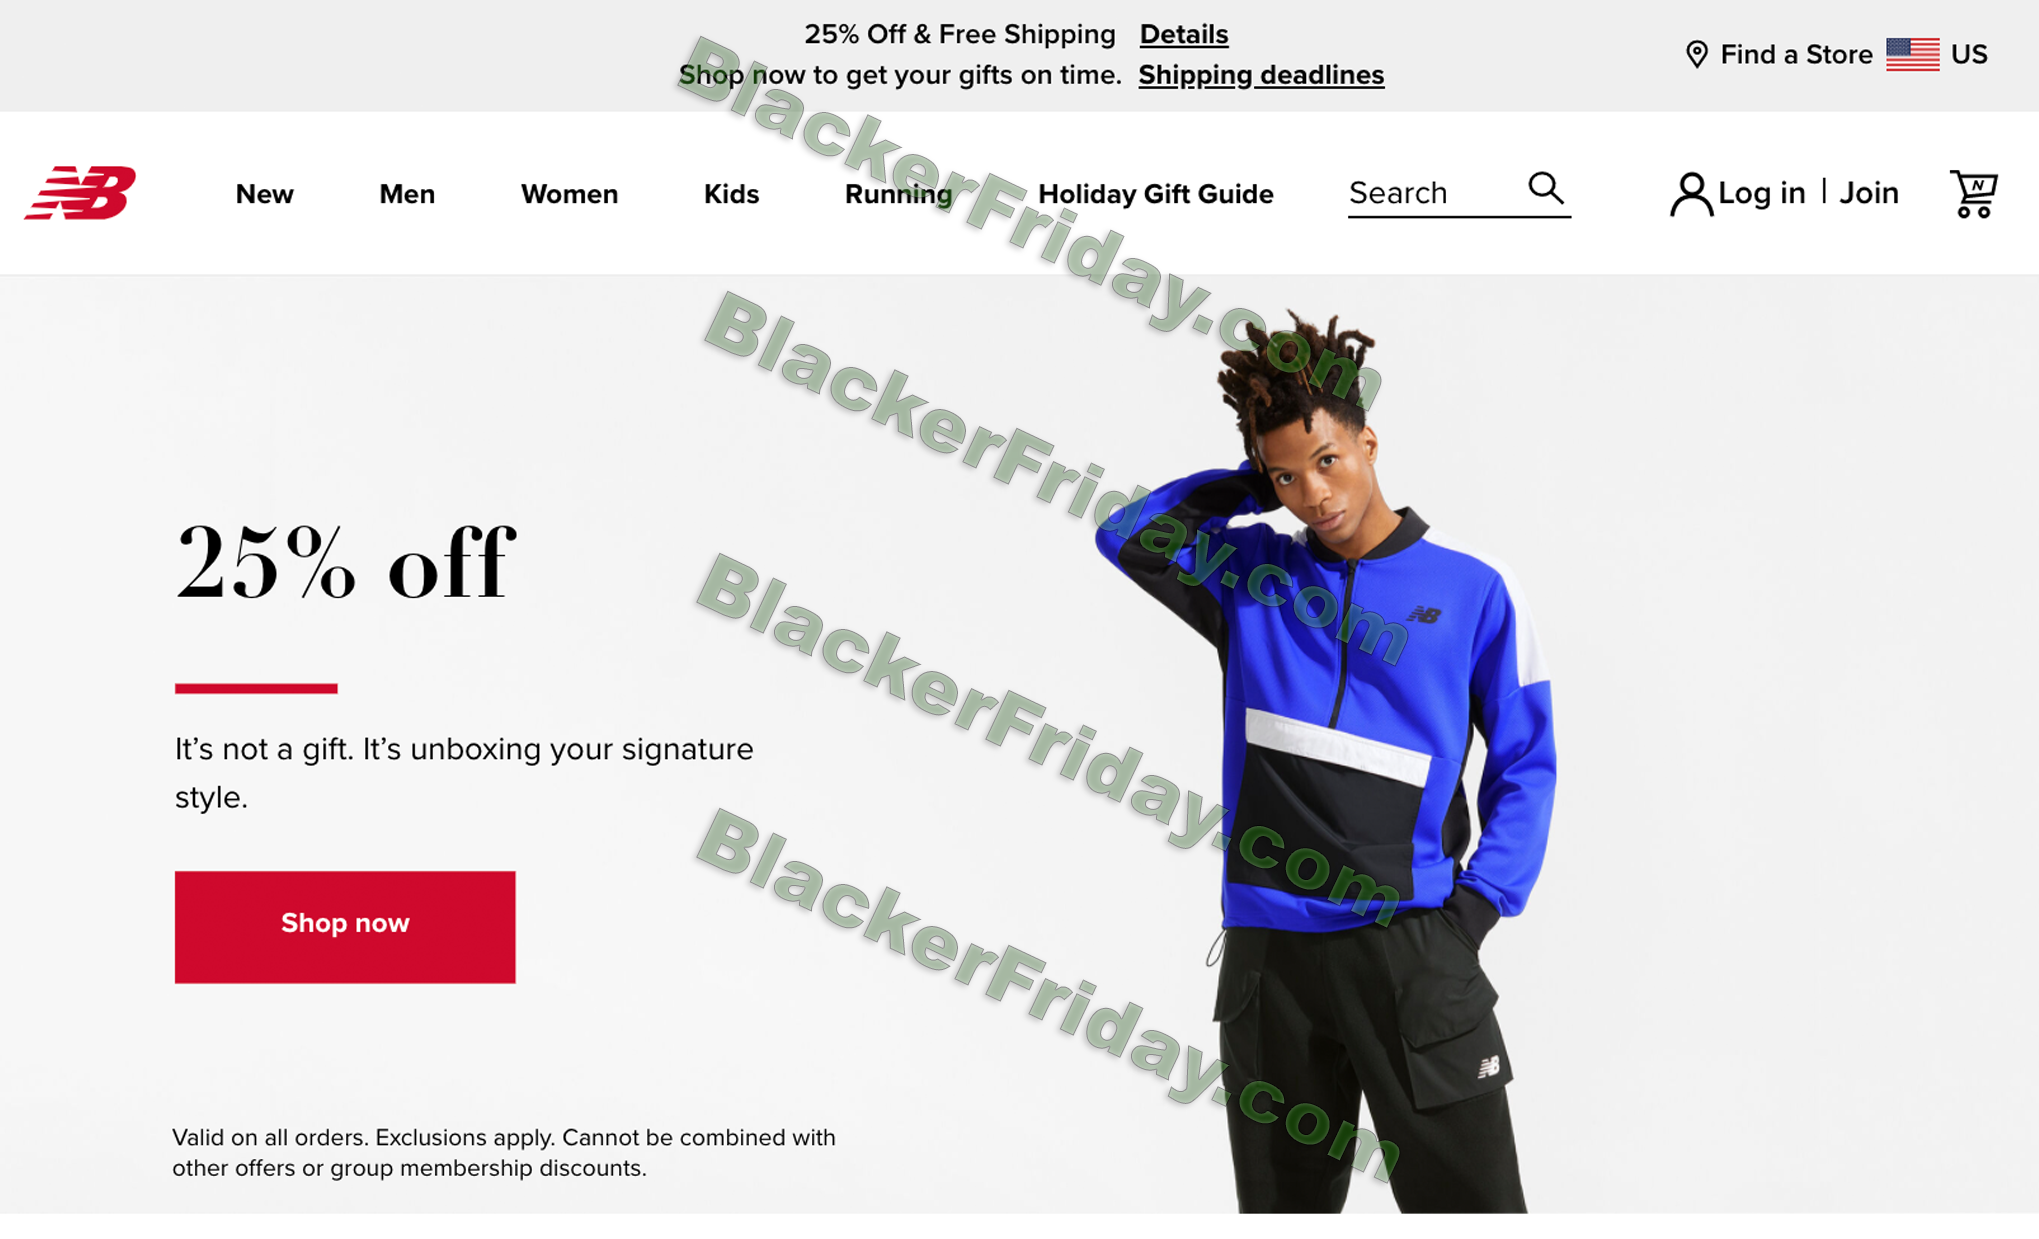 New Balance Black Friday 2021 Sale - What to Expect - Blacker Friday